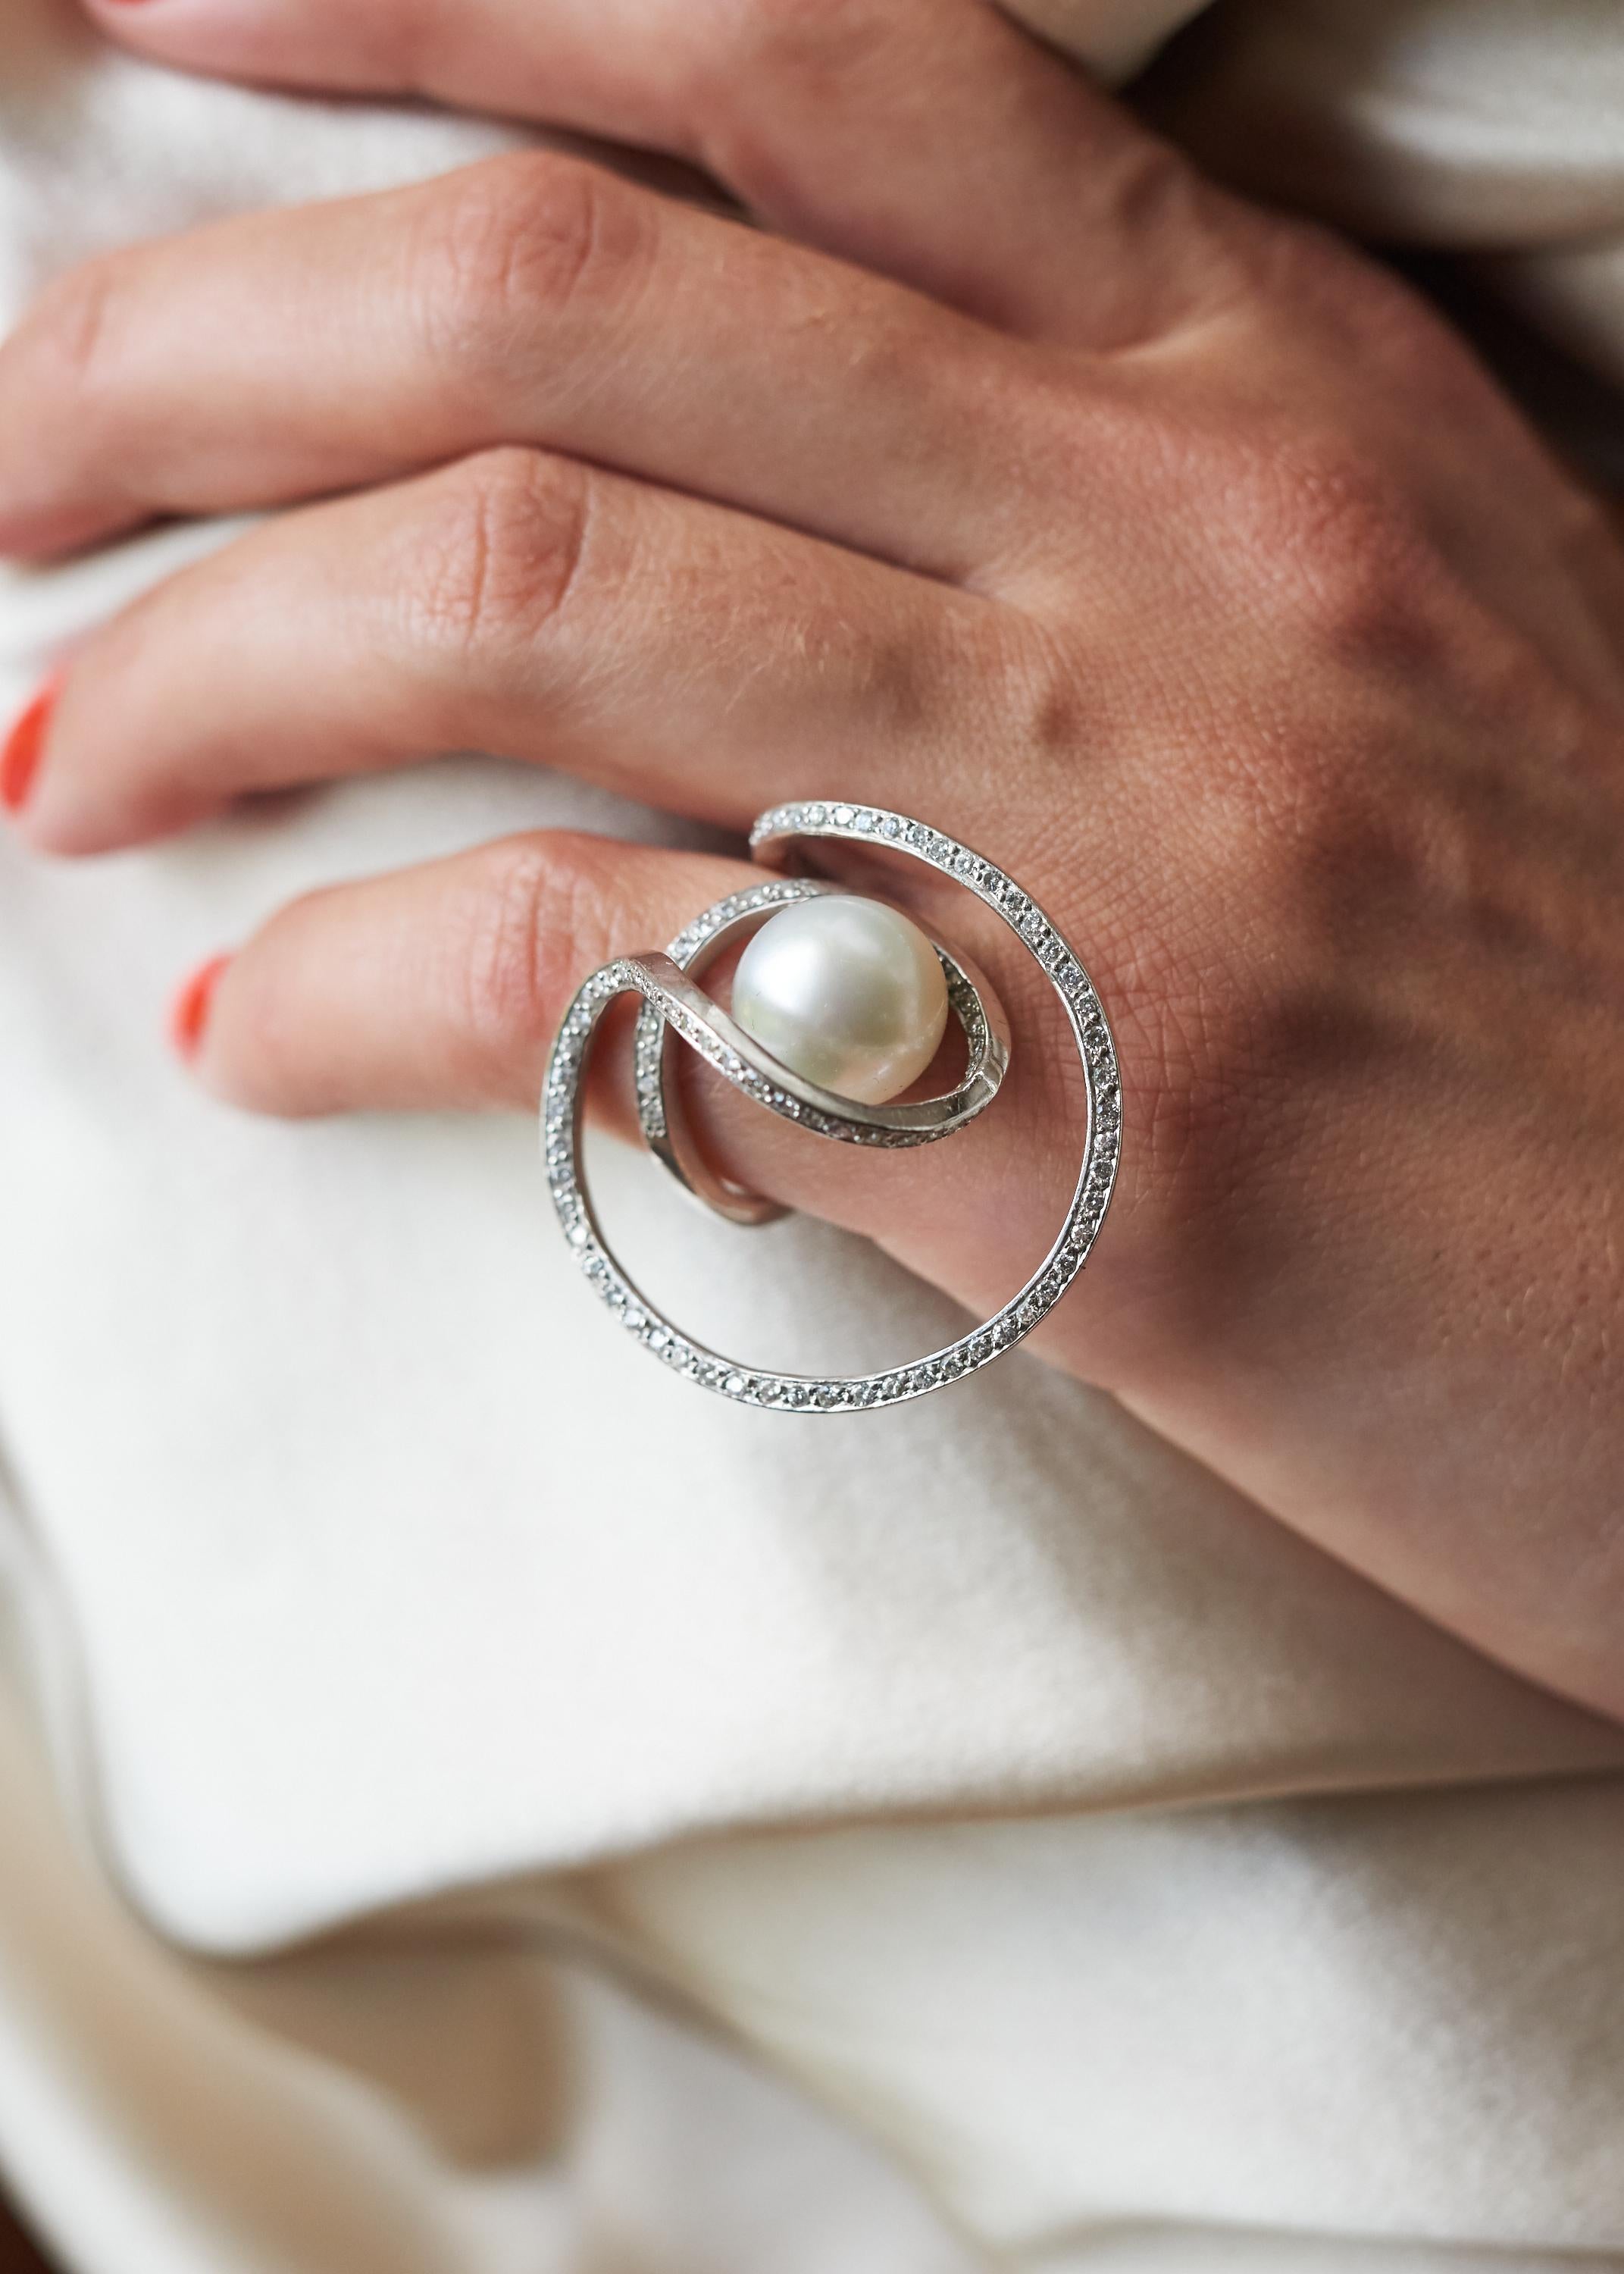 A diamond, cultured pearl and 18 karat white gold ring, by Jean Vendome, c. 1970. Stamped with maker's mark and French assay. Set with approximately 1.15 carats of round brilliant cut diamonds, ring size 4.

An elegant and inspiring jewel by Jean